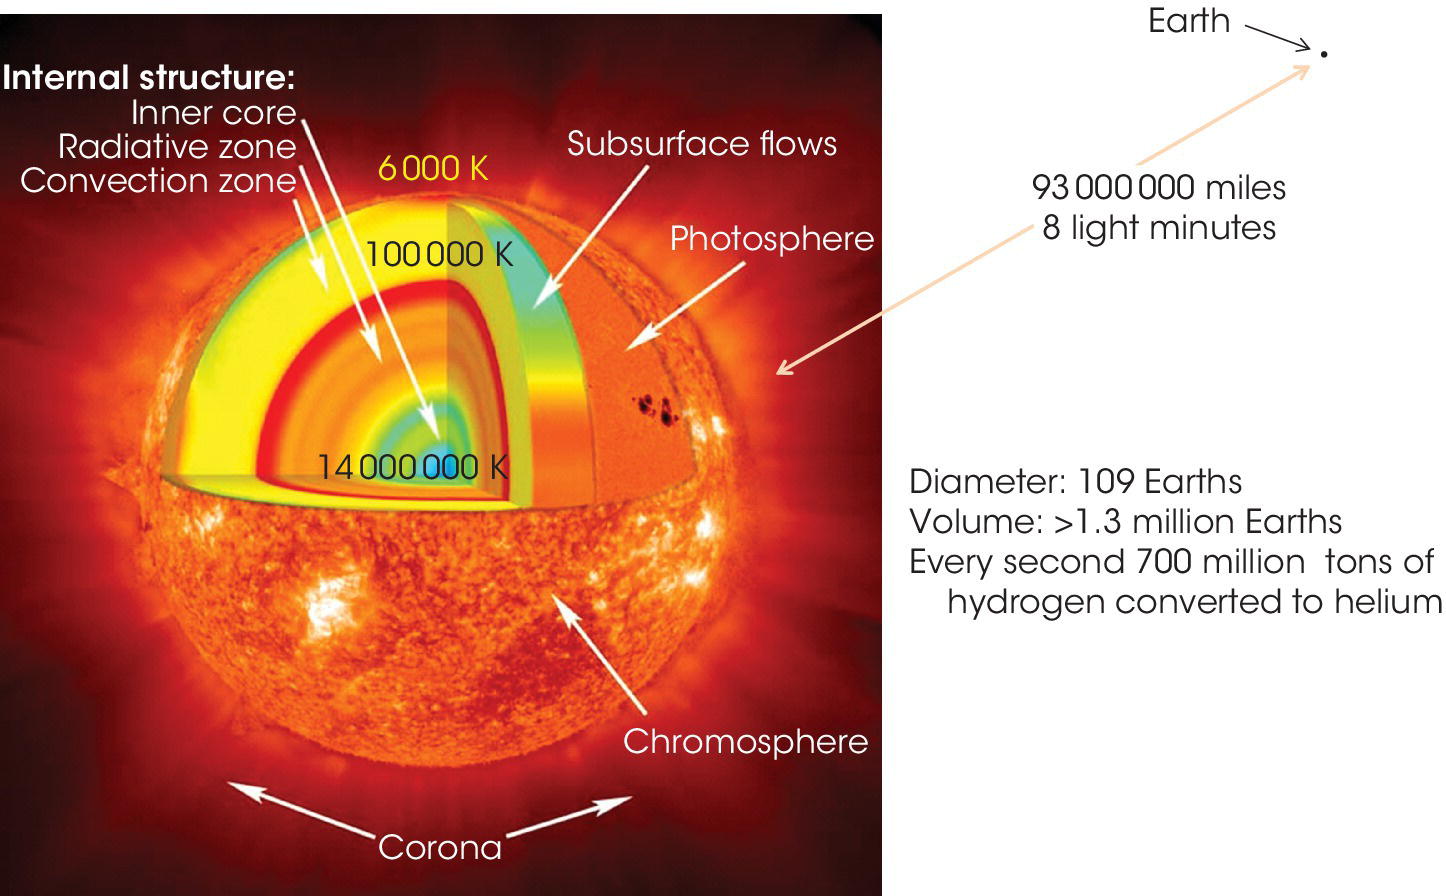 Cross section of the sun displaying the inner zone, radiative zone, convection zone, etc. (left) and a dot labeled Earth (right).  A two-headed arrow labeled 93 000000 miles, 8 light minutes links the sun and Earth.